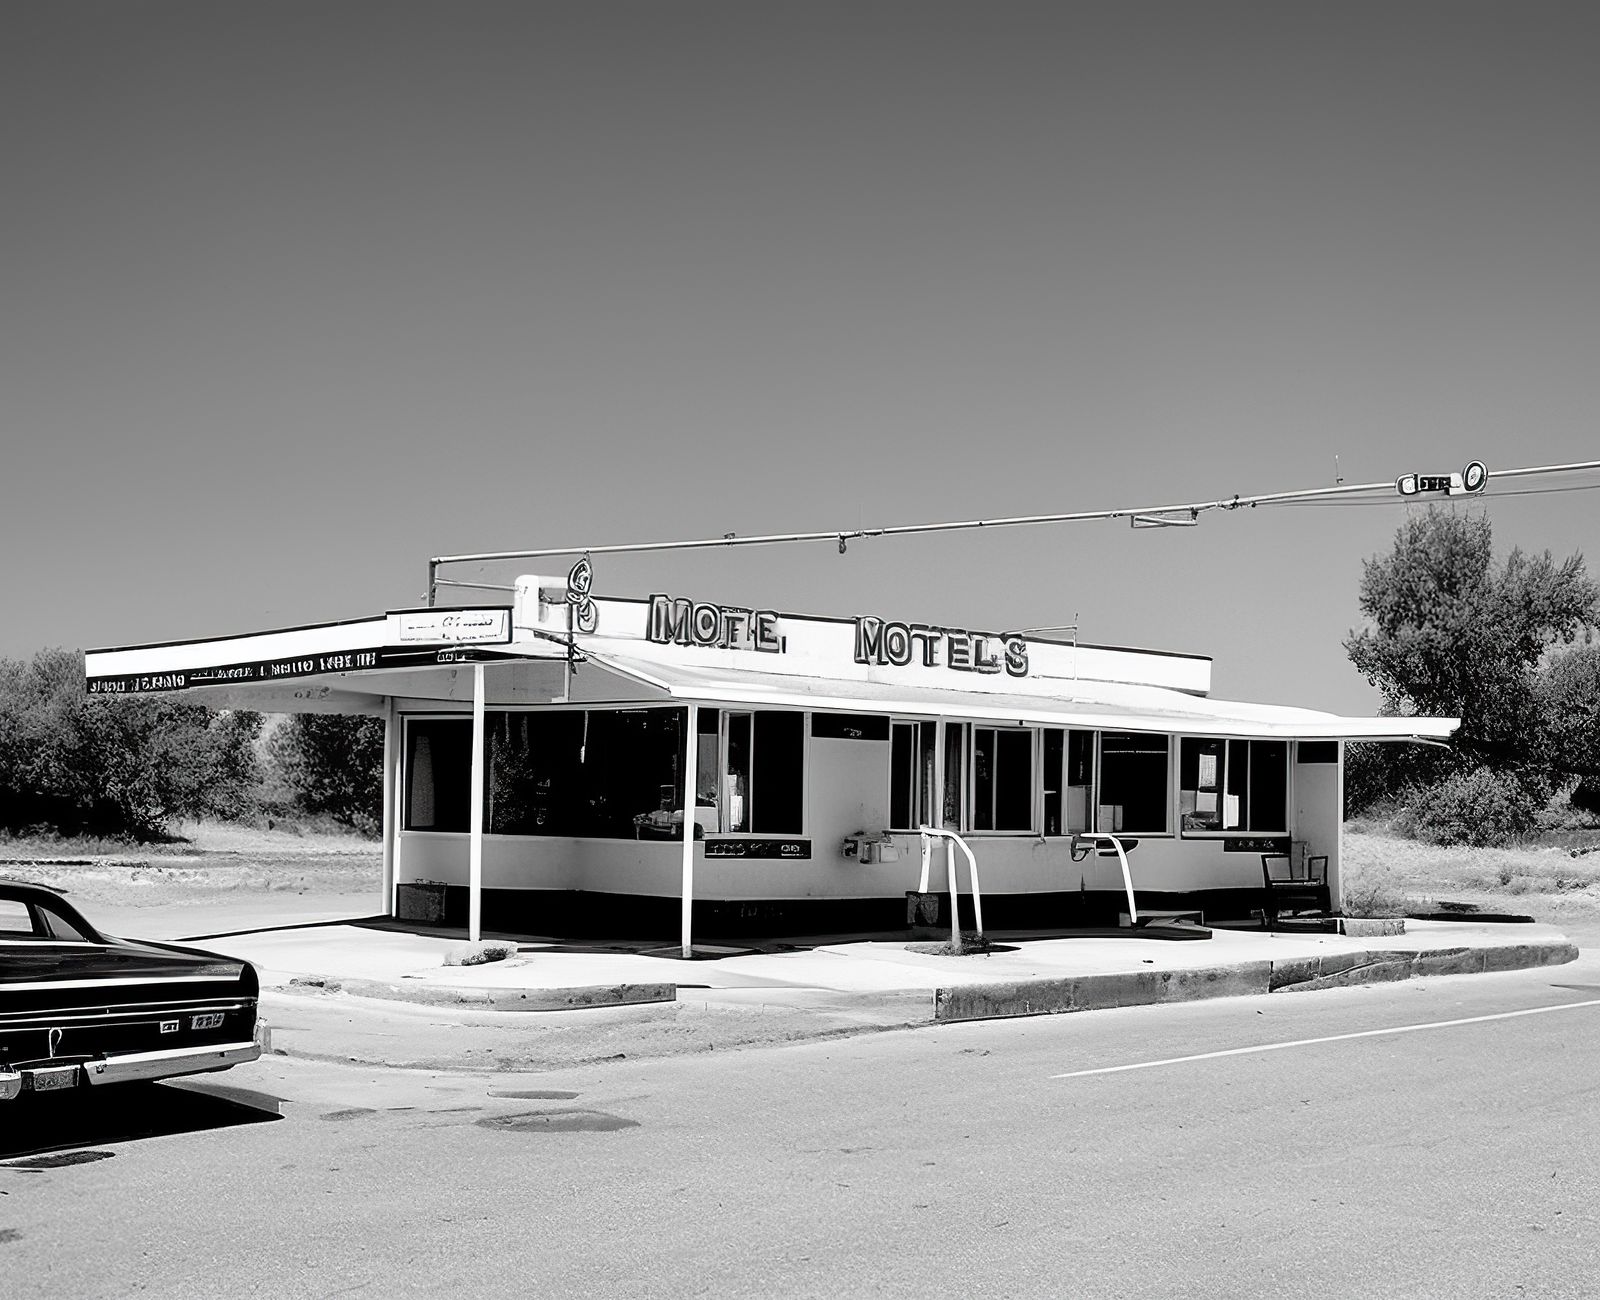 © Craig Ames - Route 66 Motels [1]. (Possibly After John Schott)